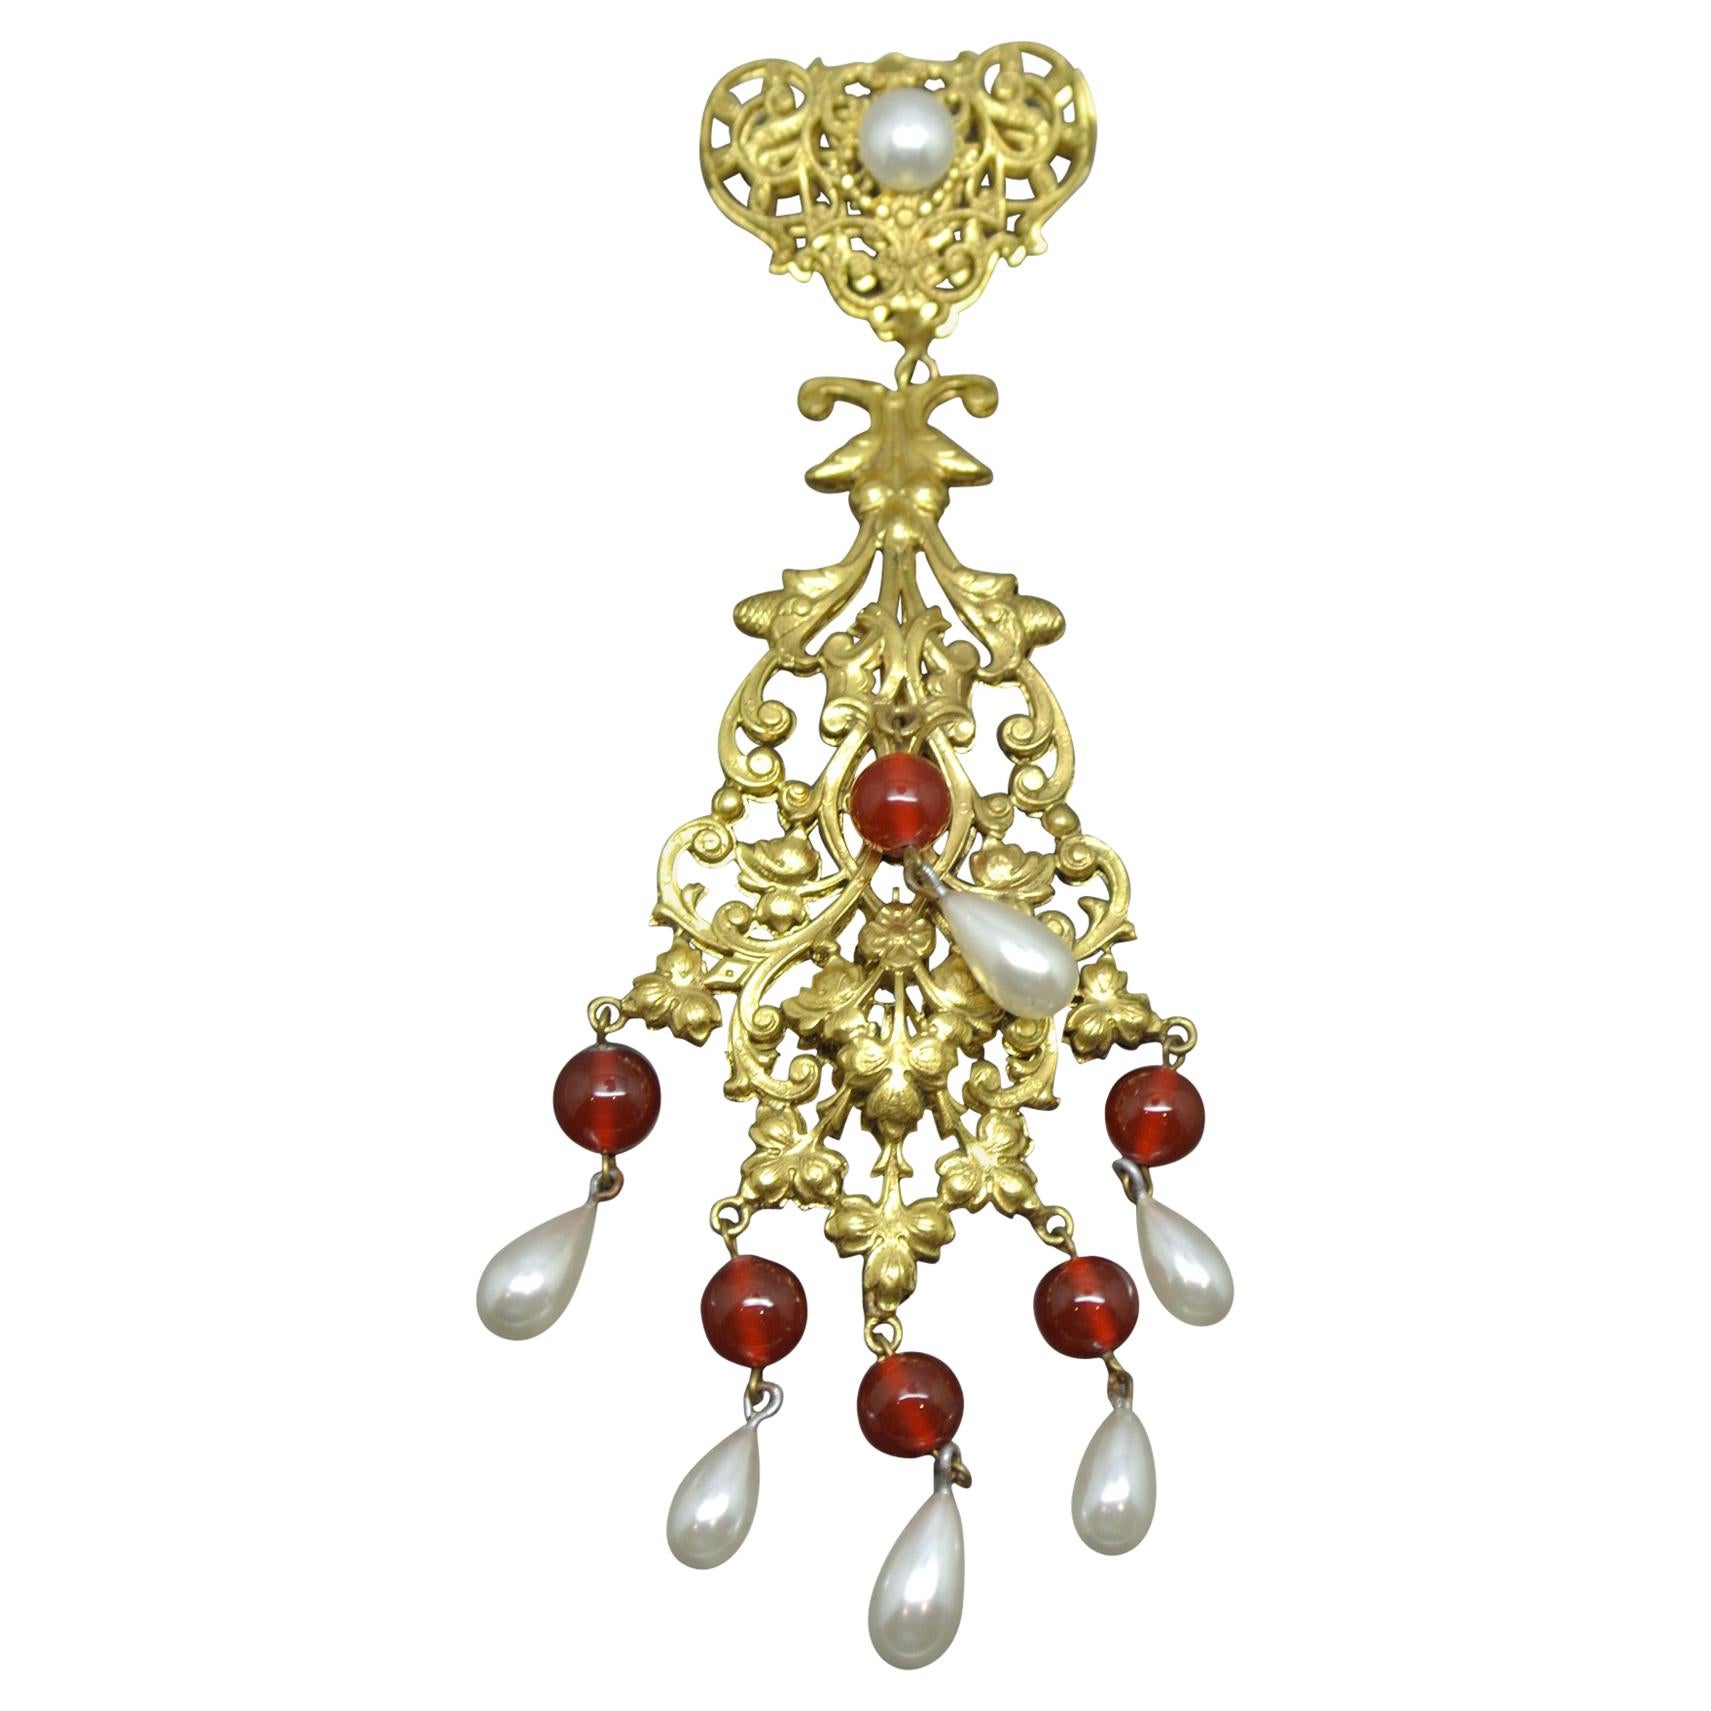 French Woloch Paris red Poured Glass byzantine filigree faux pearl drop Brooch For Sale